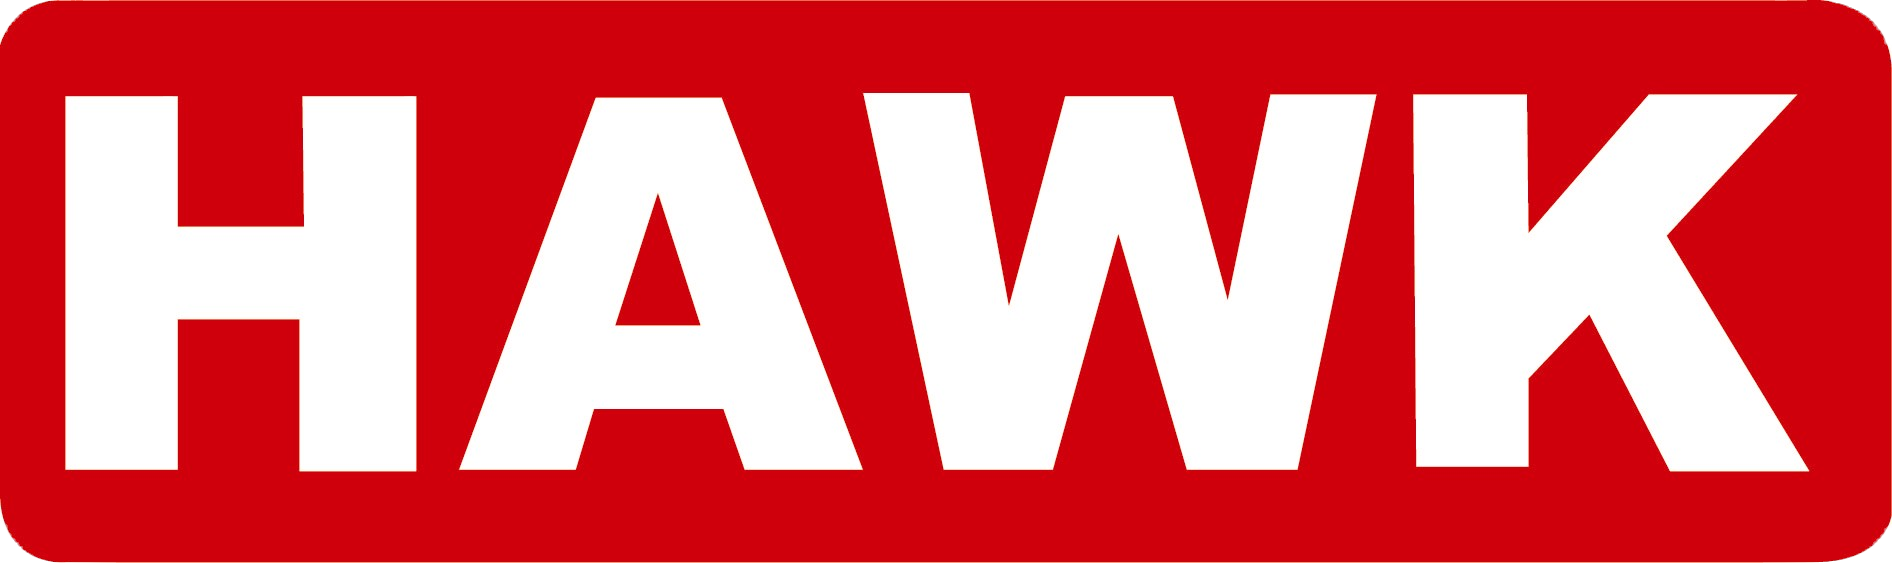 A red sign that says hawk in white letters